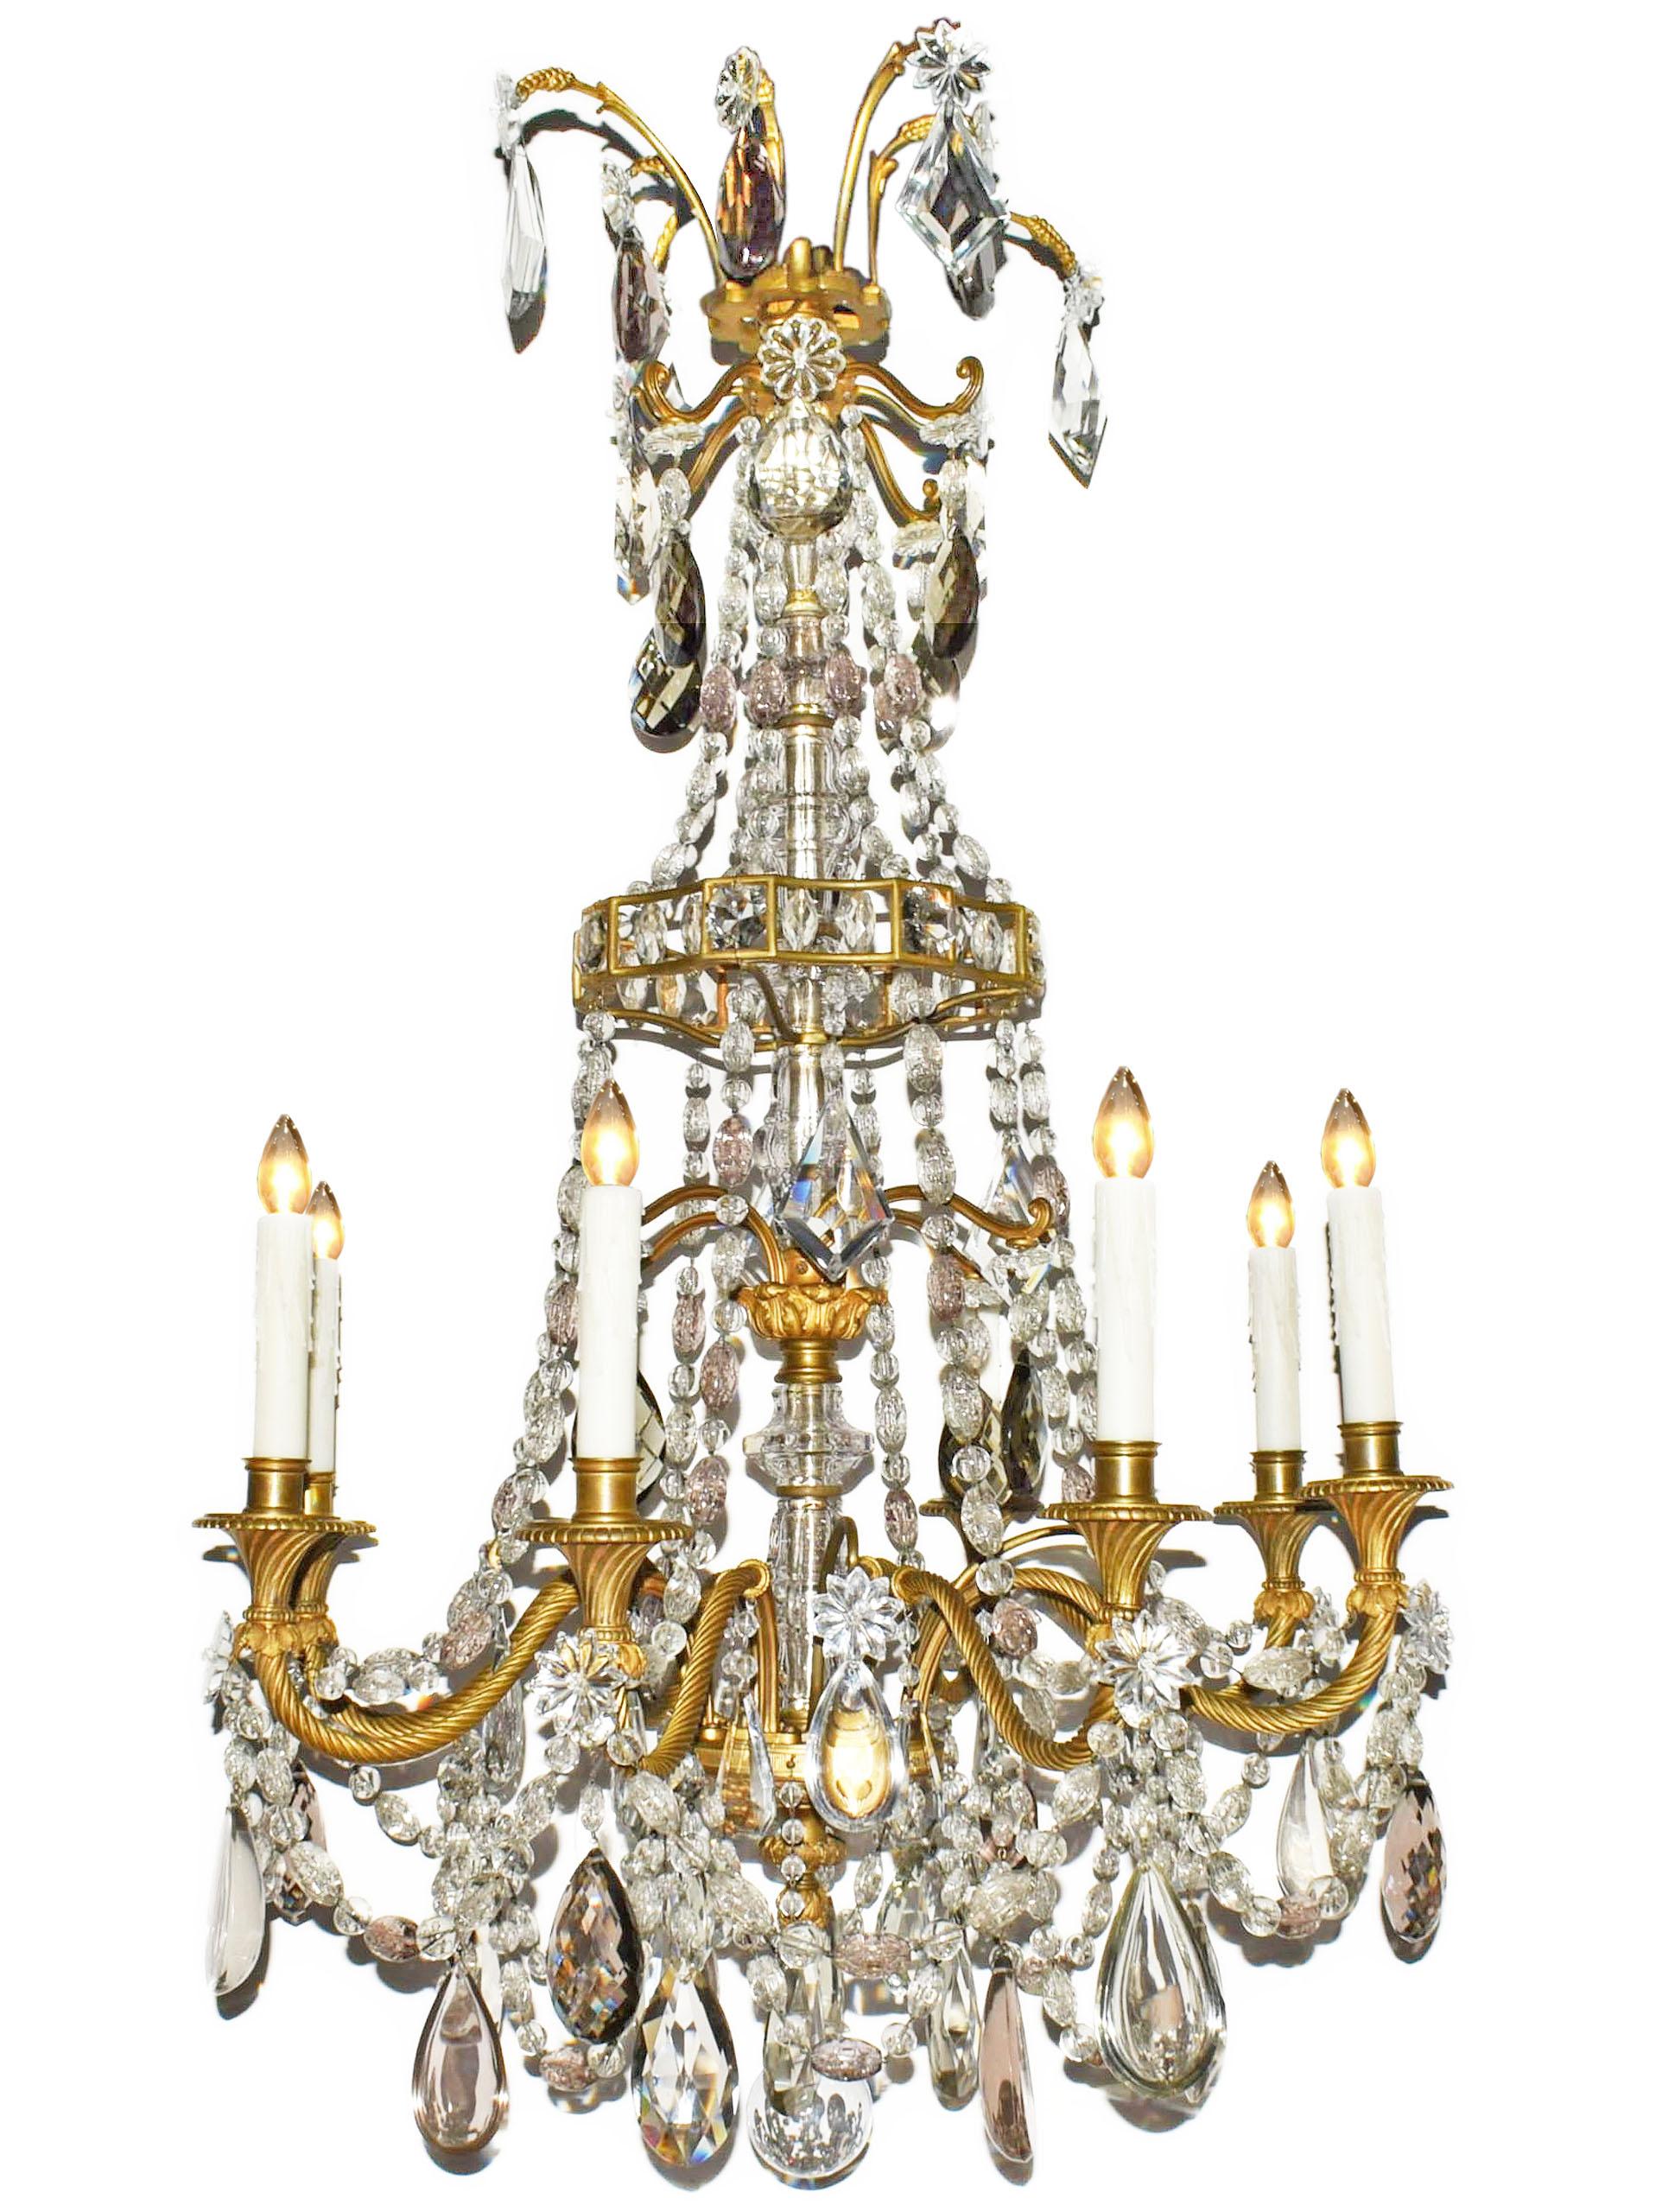 Late 19th Century Very Fine Gilt Bronze & Crystal Napoleon III Style Chandelier For Sale